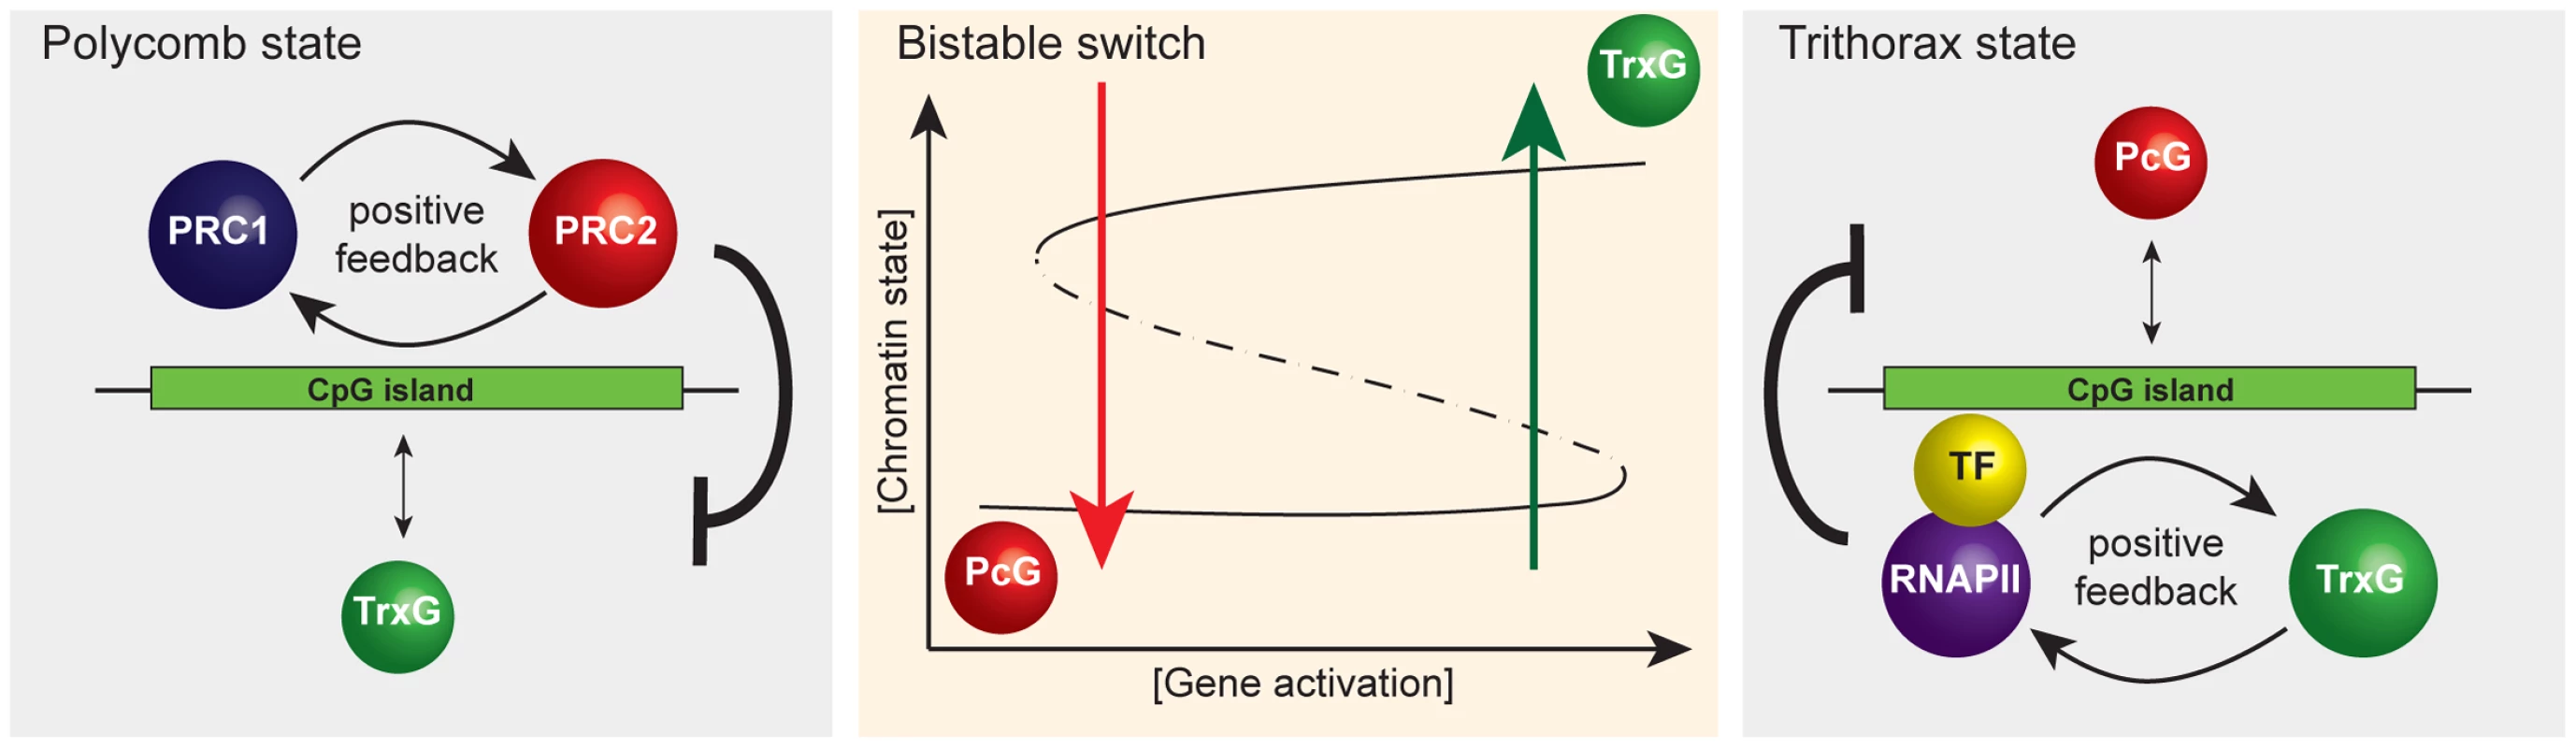 A simplified representation of the responsive model emphasizing that it has properties of a classical bistable switch.